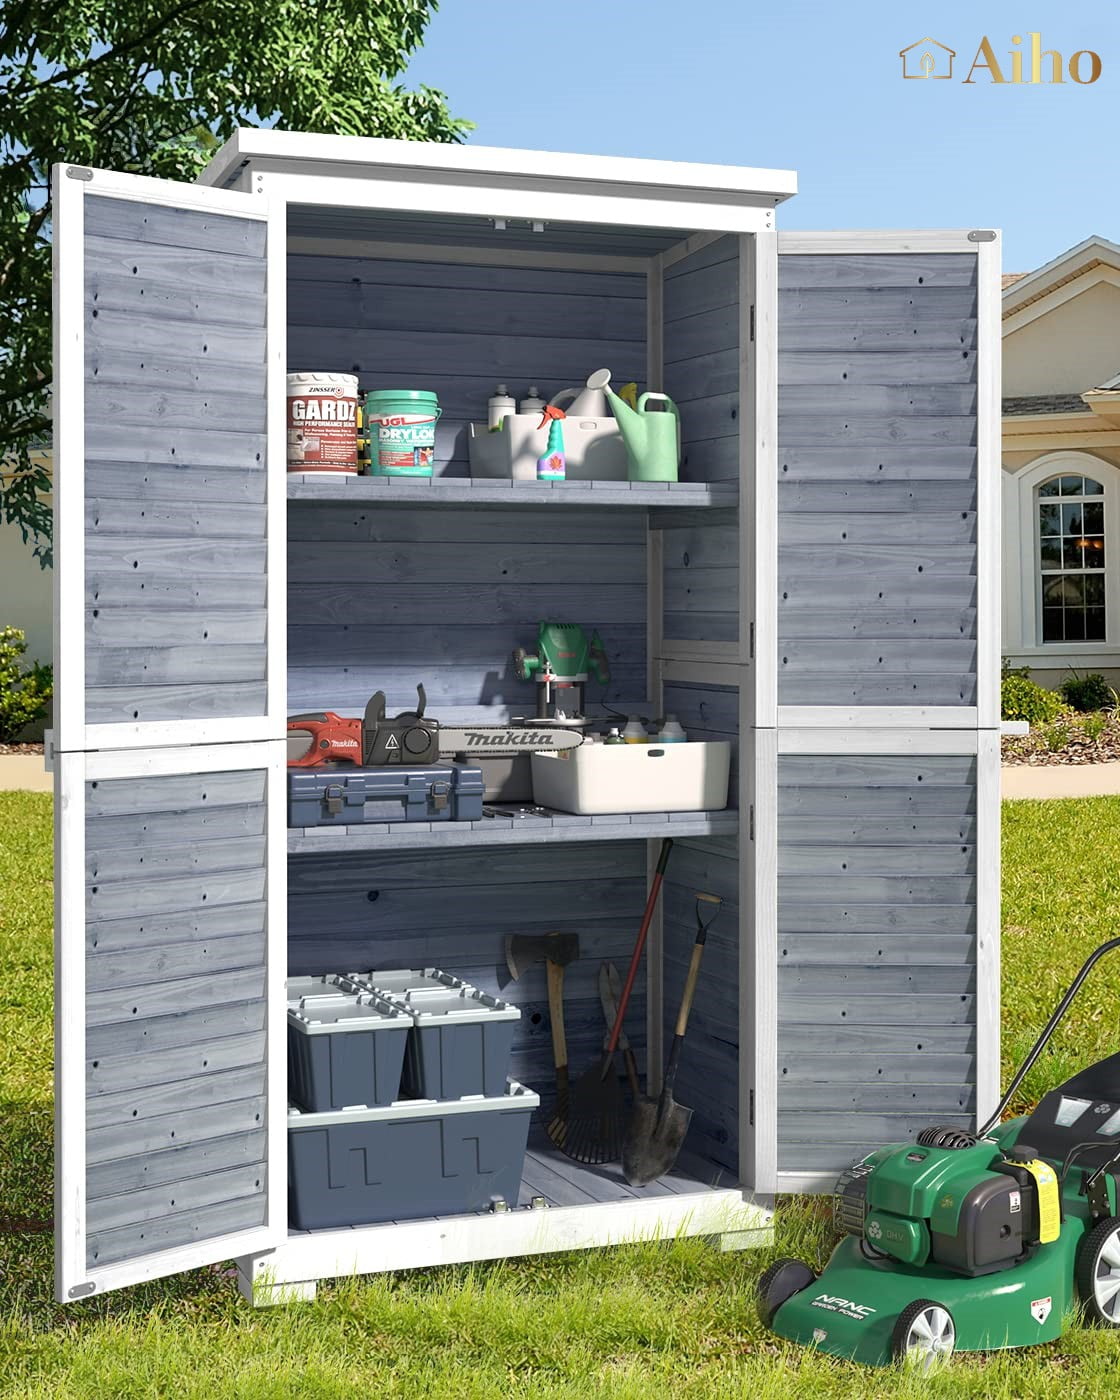 Outdoor Storage Cabinet with Removable Shelves, Aiho Wooden Outdoor Storage for Garden, Lawn, Patio - Gray - image 1 of 11